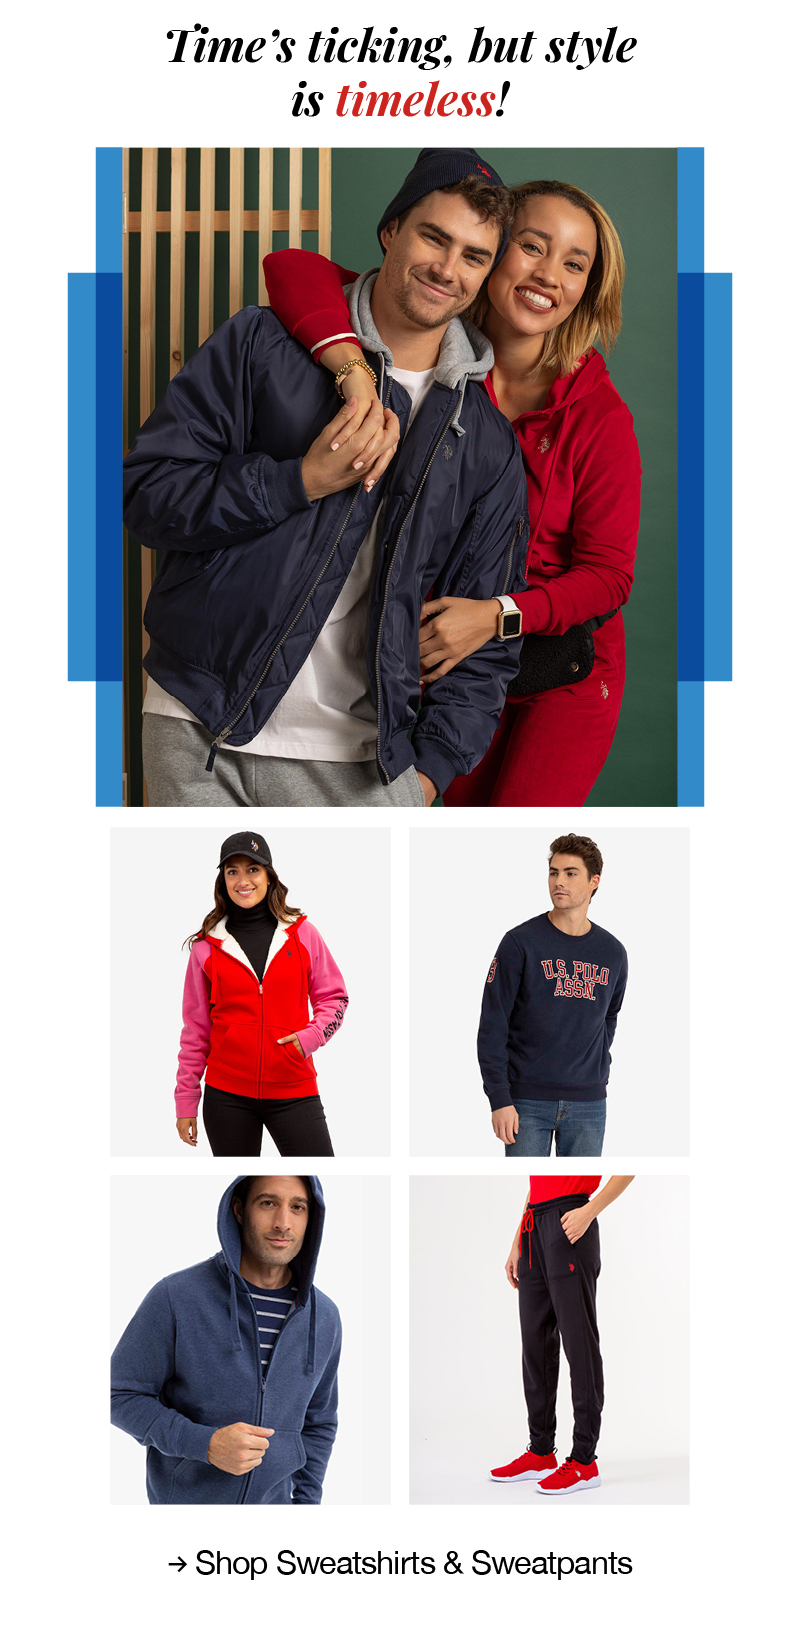 Time's ticking, but style is timeless! Shop sweatshirts and sweatpants